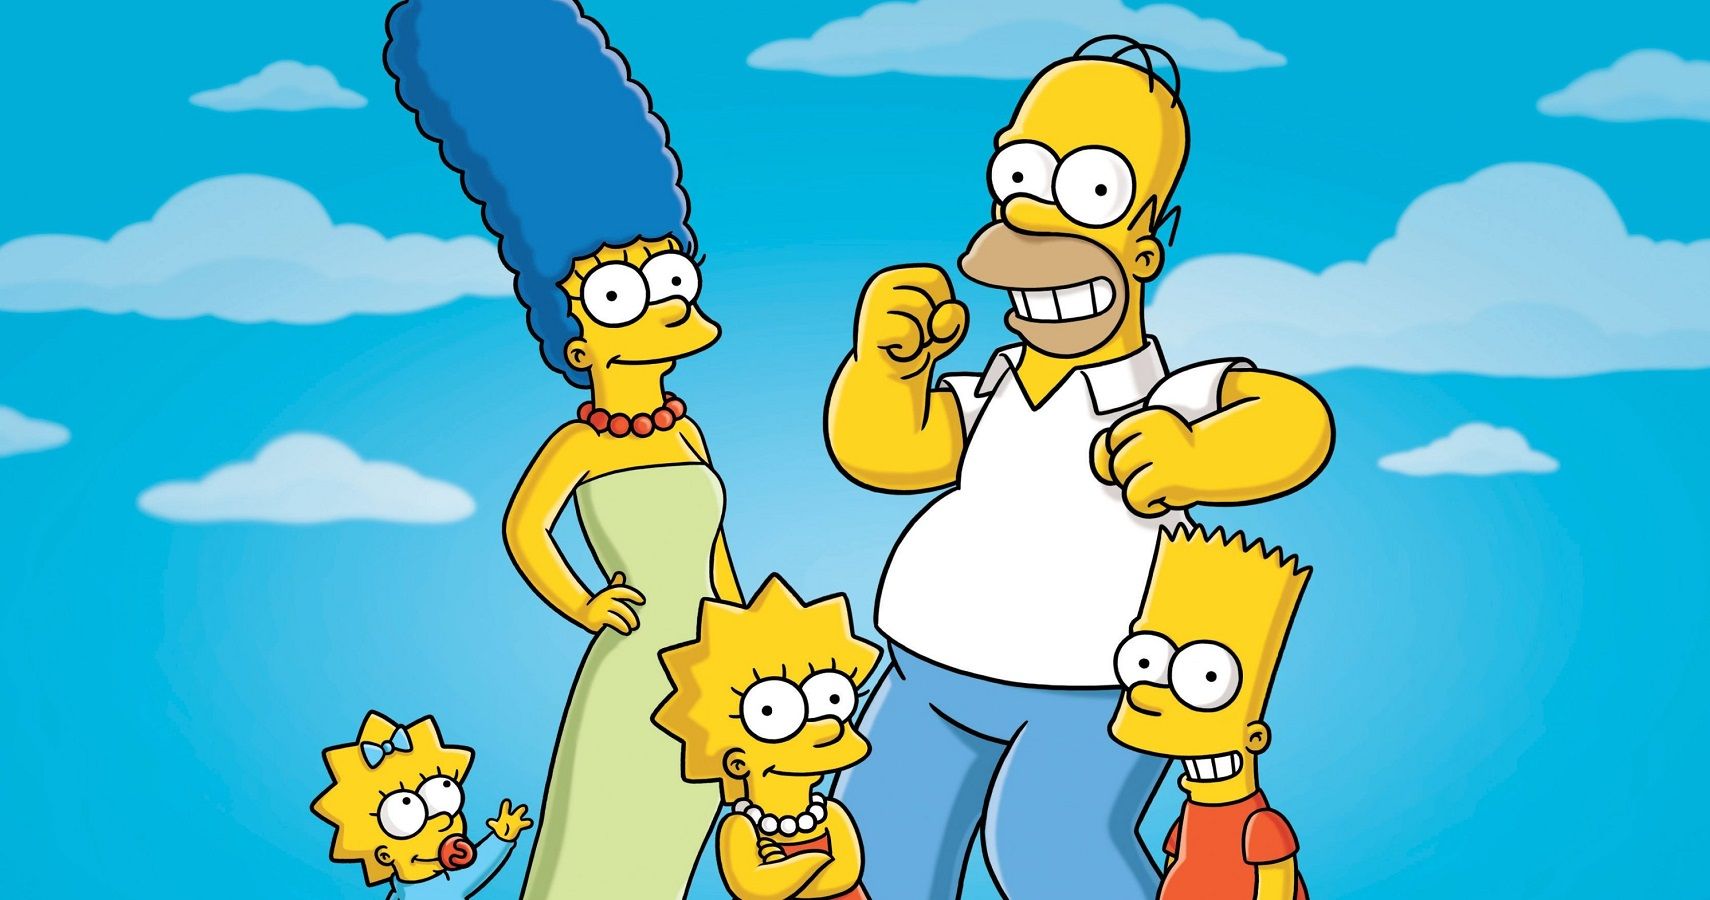 A poster of The Simpsons